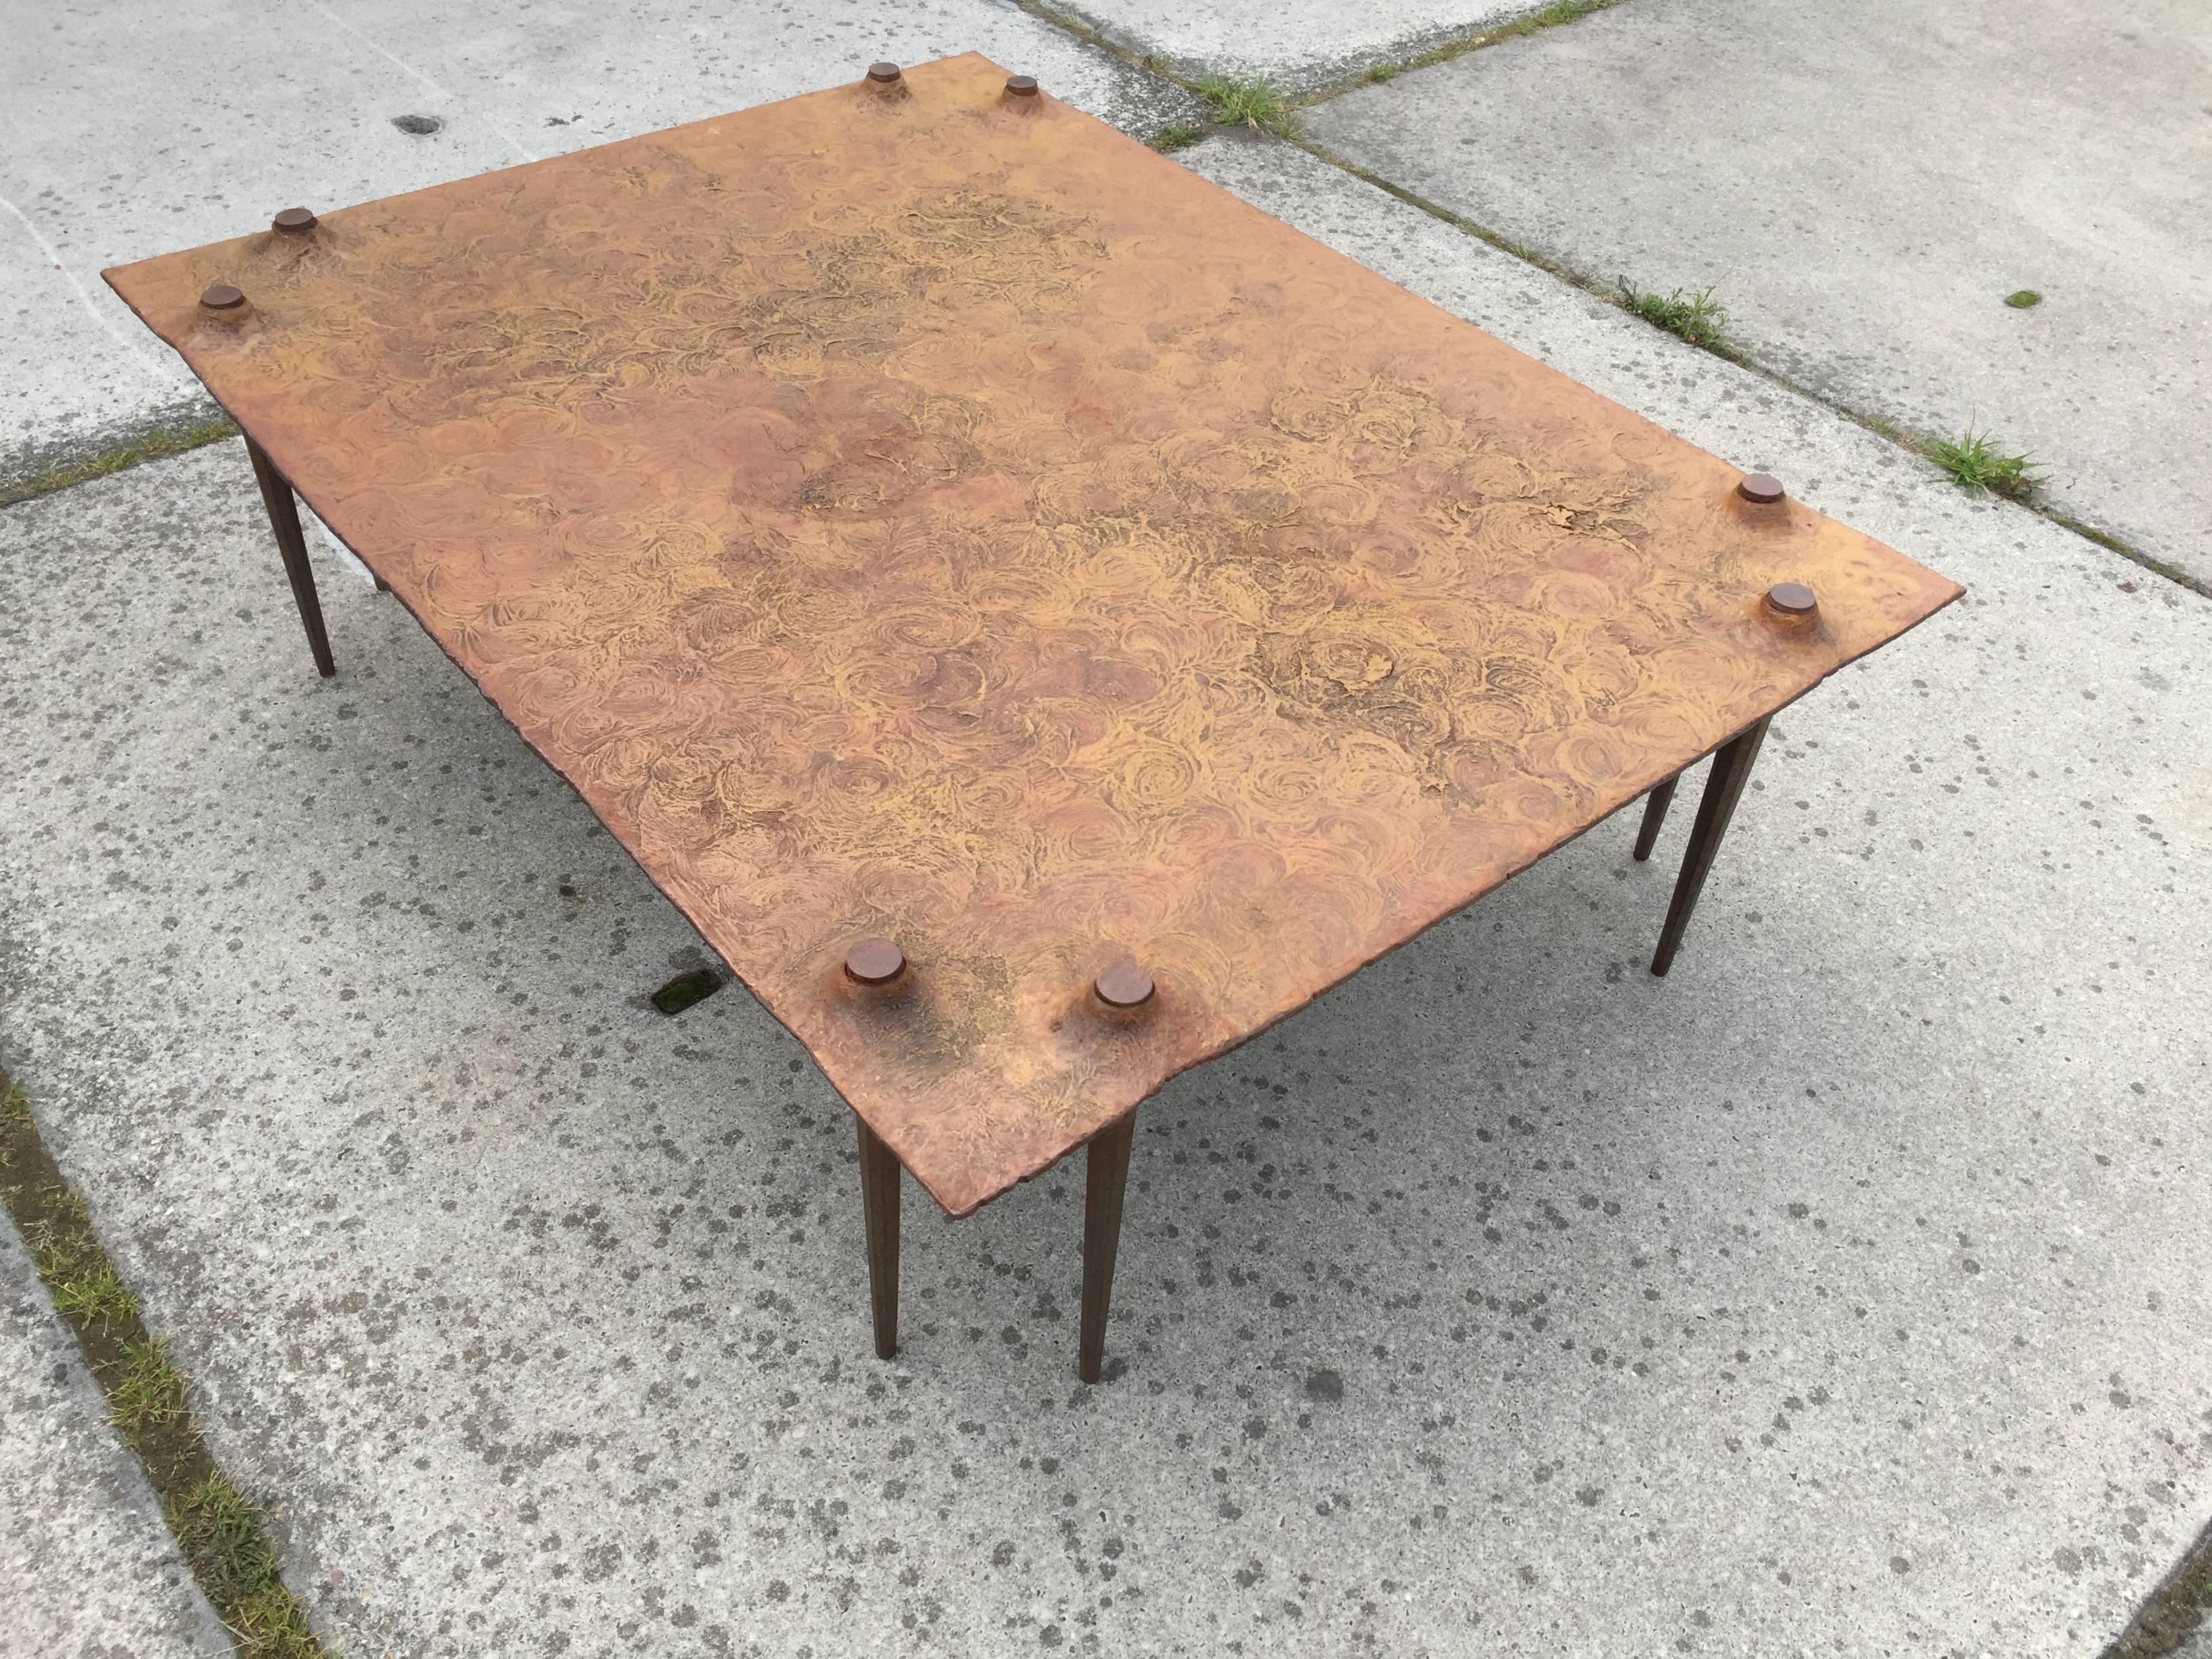 Fantastic shaped Brutalist coffee table by Idir Mecibah (1958-2013), produced by Smederij Moerman, 1998. This table is from the scrub series designed in the end of the 1980s and produced till the end of the 1990s. The table is made of solid steel